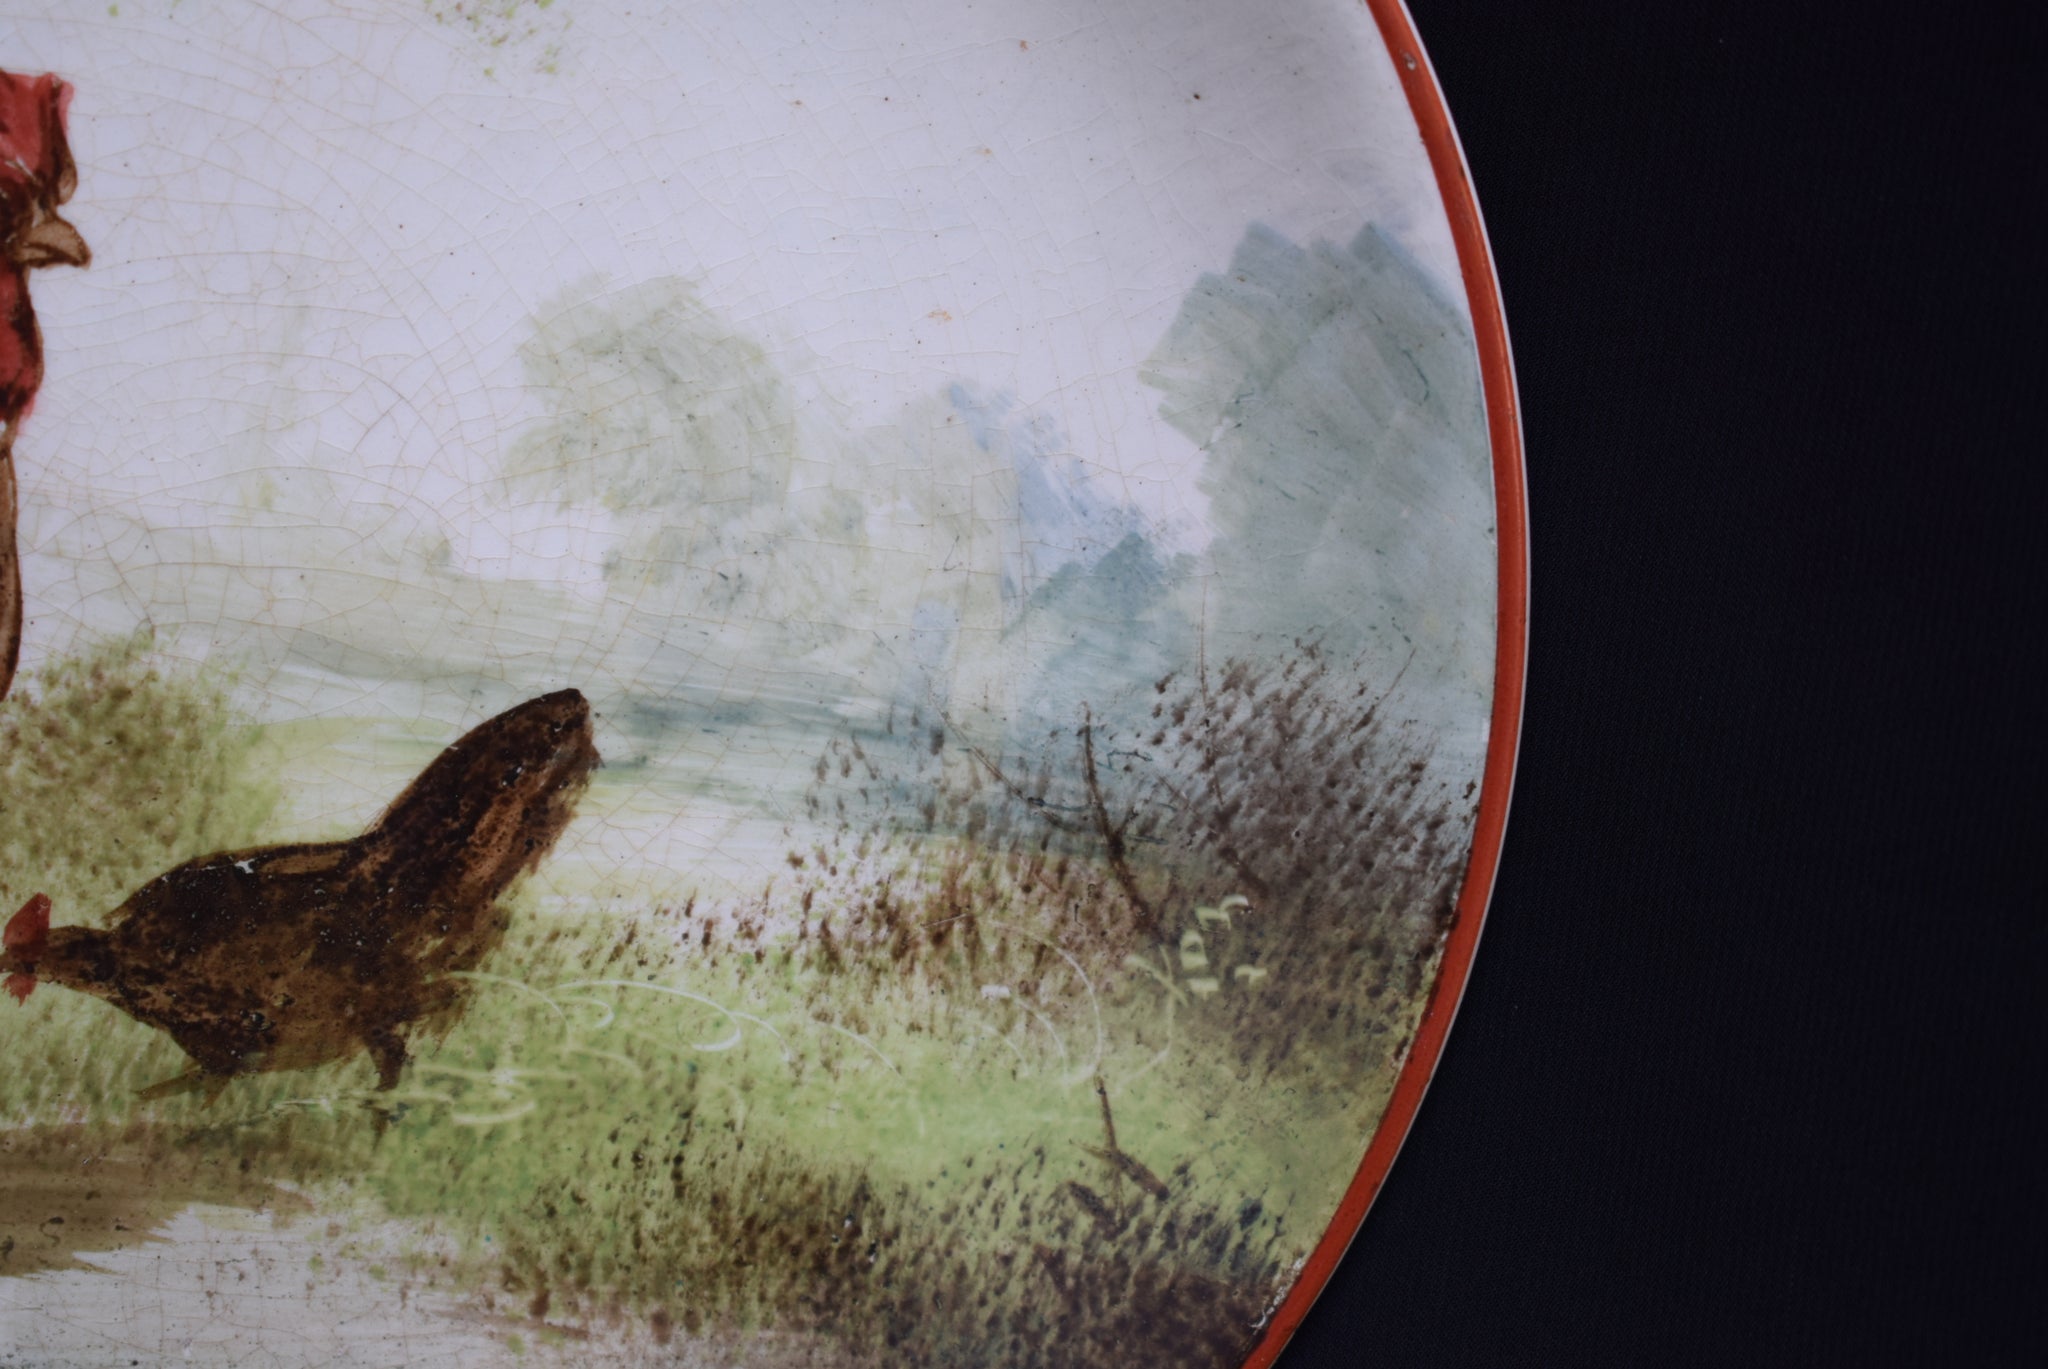 Hand Painted Plate - Charmantiques